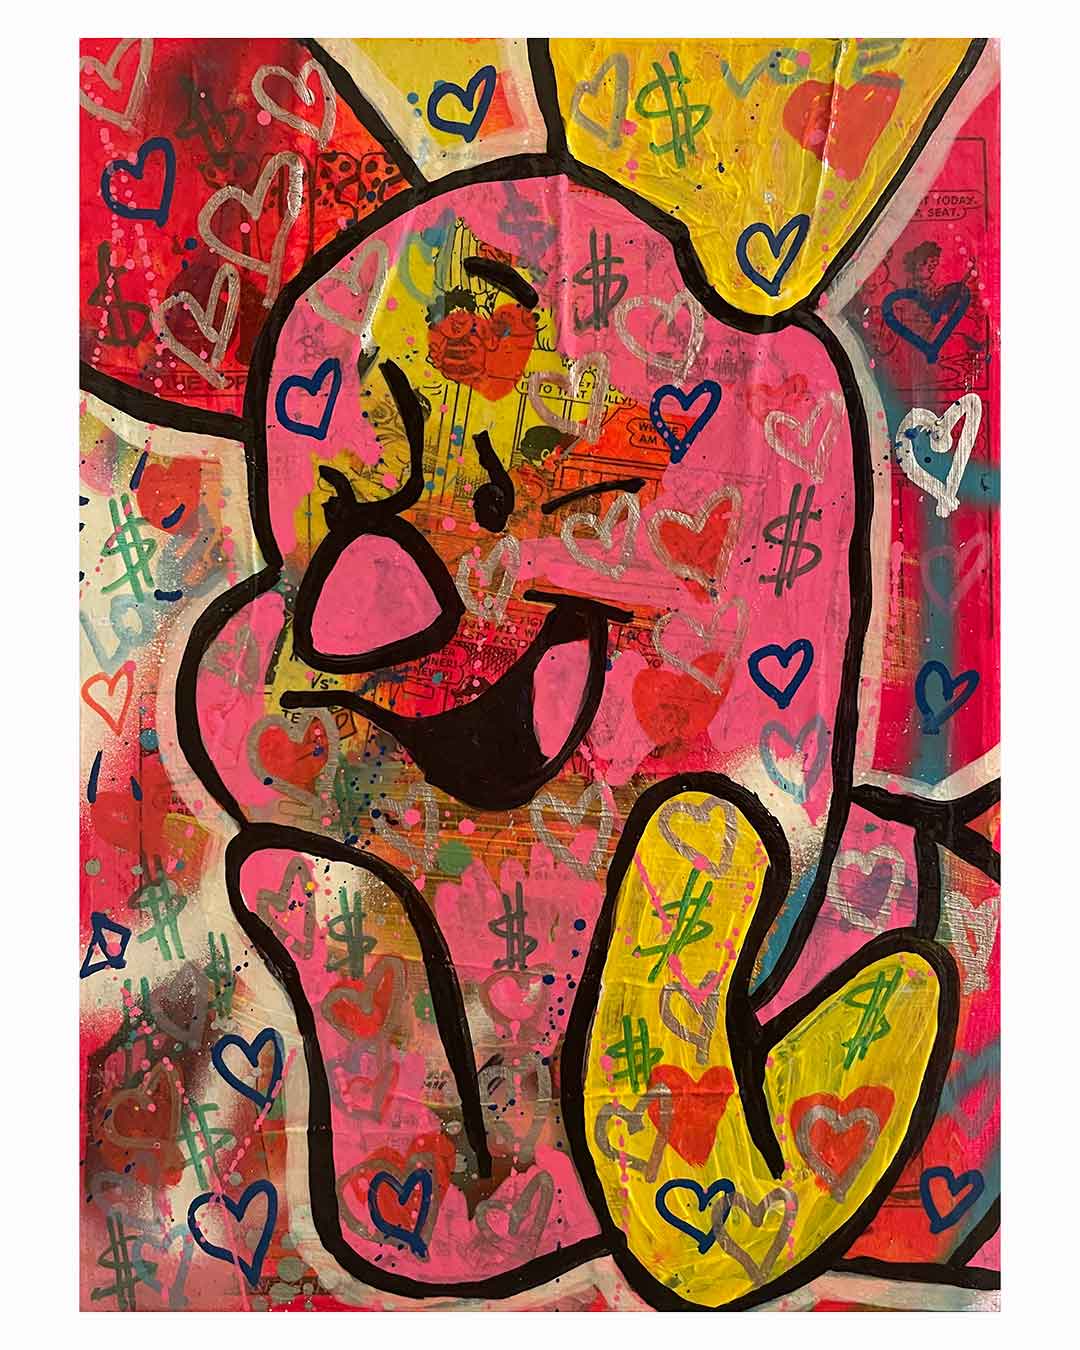 Graffiti Pig Painting by Barrie J Davies 2023, Mixed media on Canvas, 30cm x 42cm, Unframed and ready to hang.